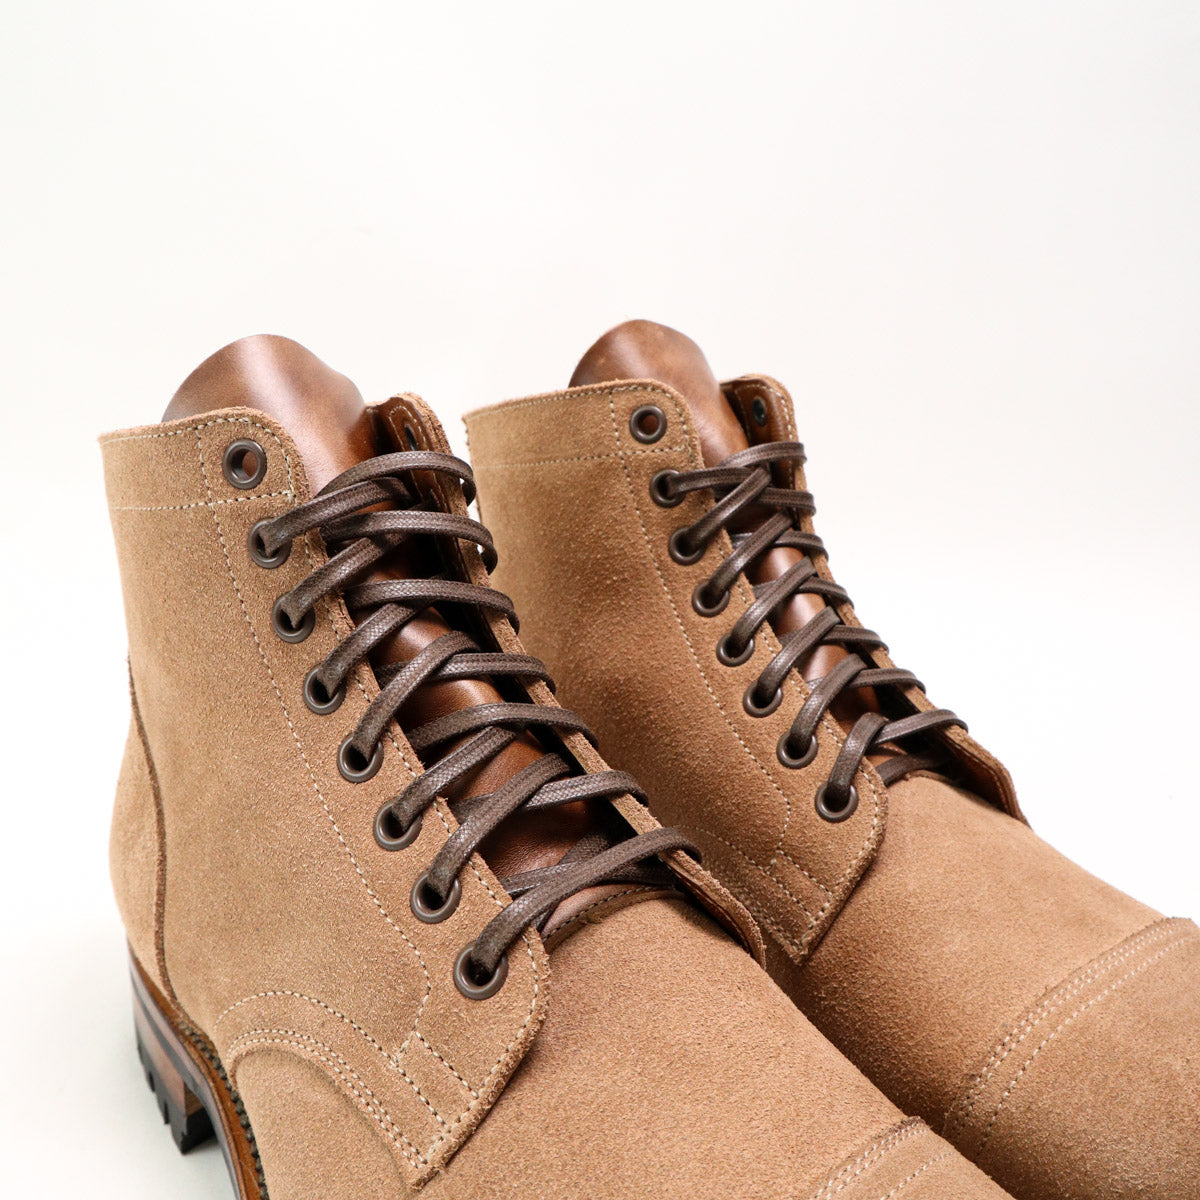 Service Boot 2040 Horween Marine Field Roughout